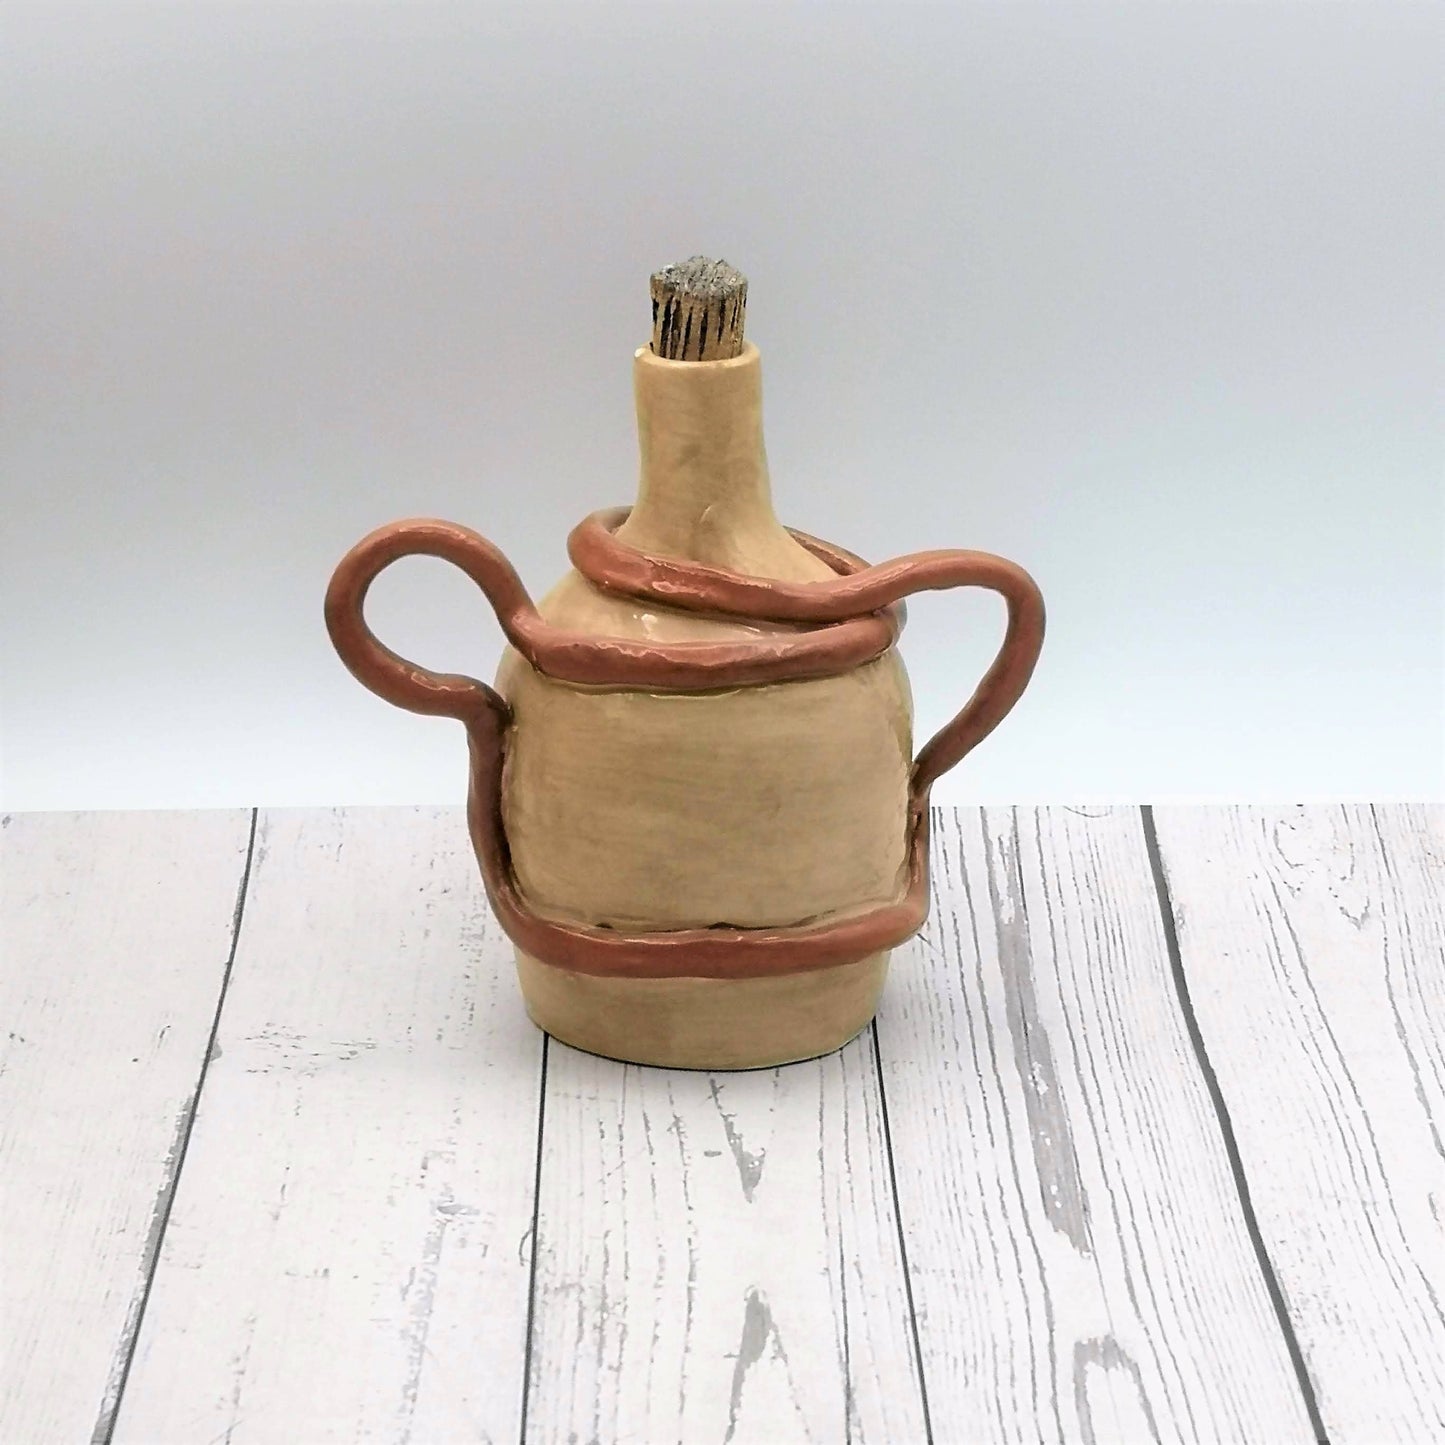 Handmade Ceramic Bottle With Cork Stopper, First Home Gift, Pottery Vase With Hand Built Sculptural Handles, Mom Birthday Gift From Daughter - Ceramica Ana Rafael